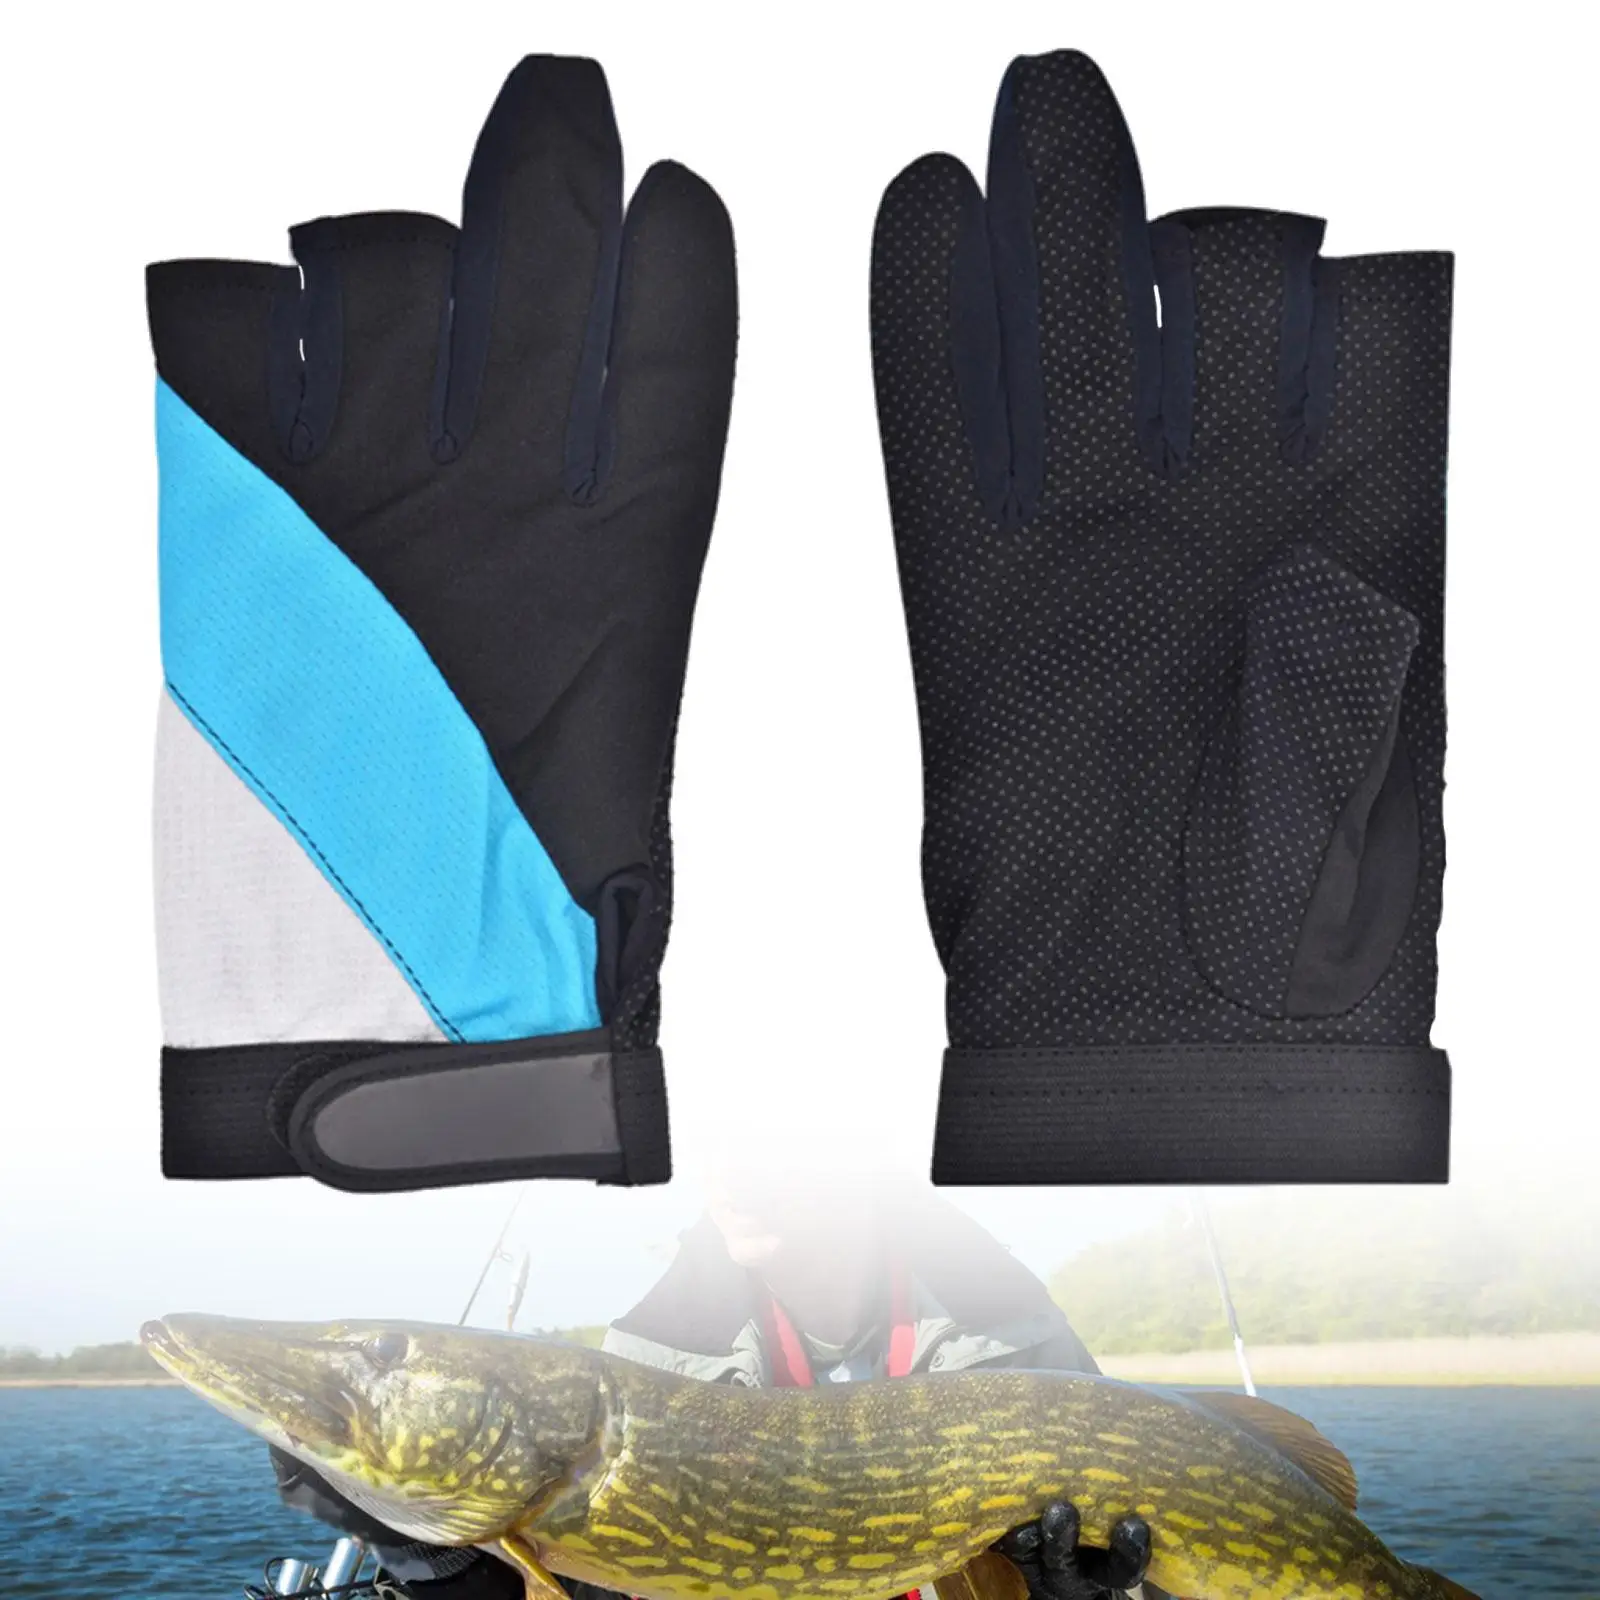 3 Cut Fingers Gloves Finger Protector Gloves for Camping Hiking Outdoor